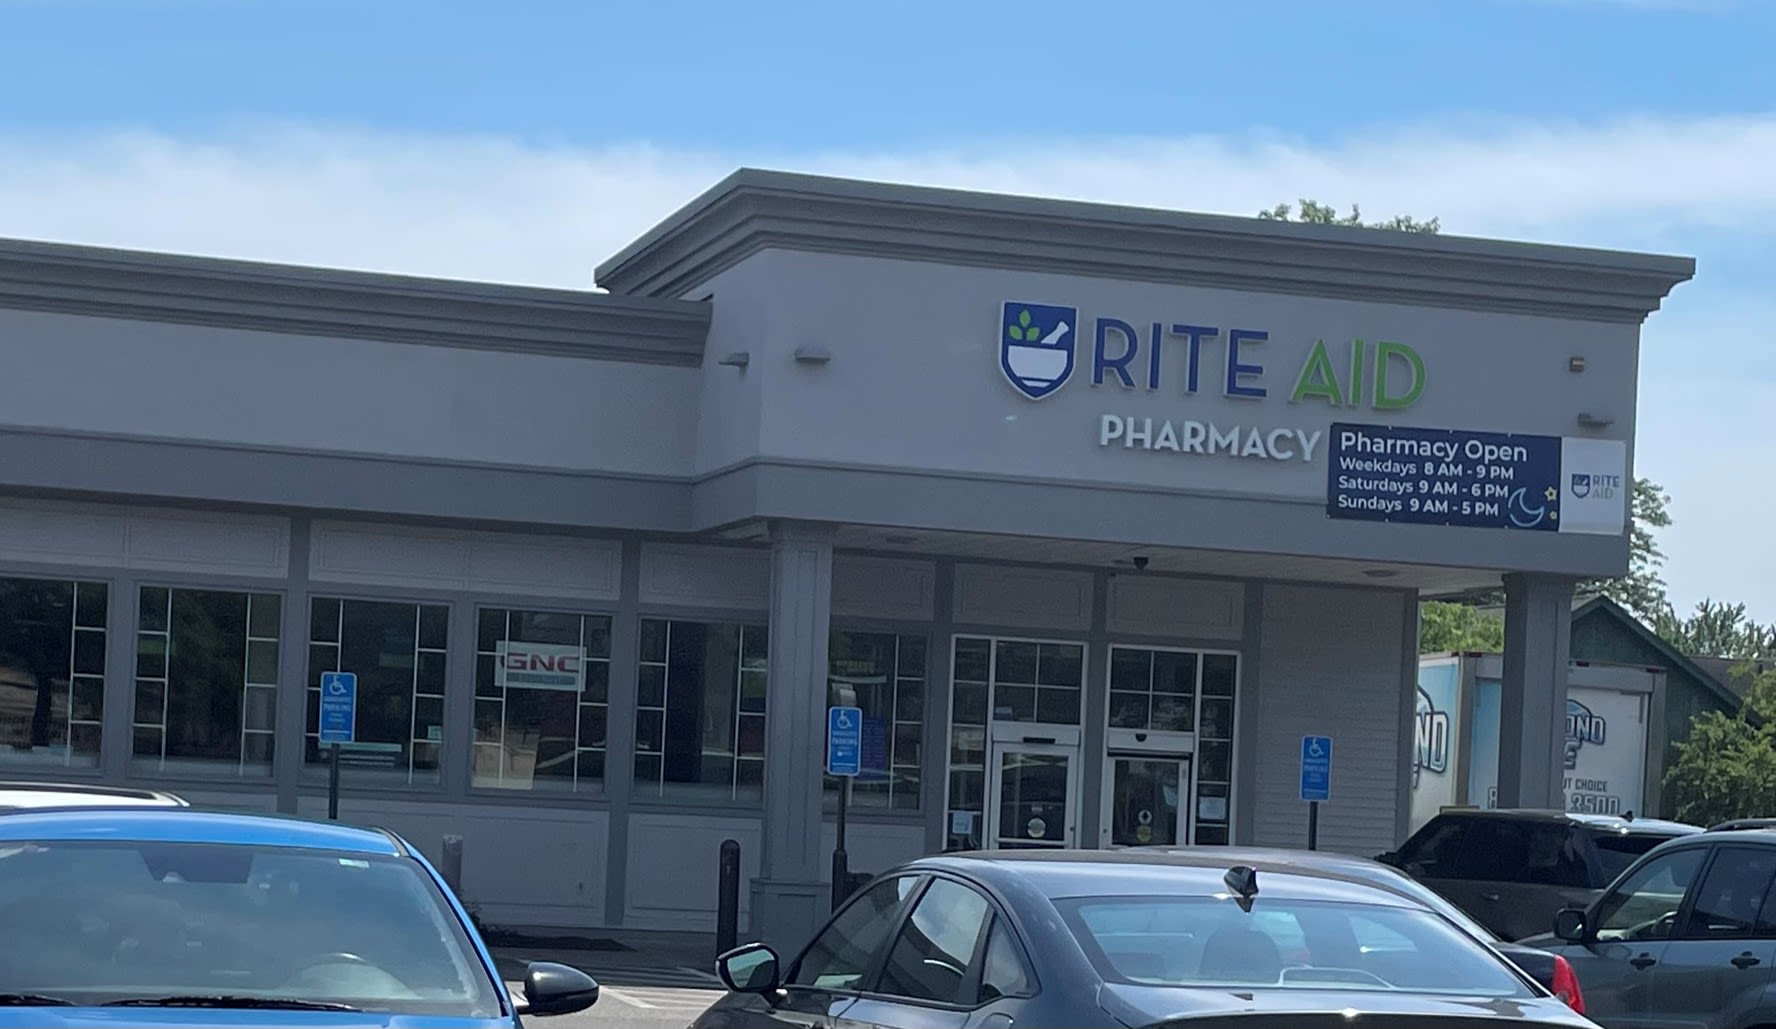 Rite Aid customer data accessed in recent cybersecurity breach, company says